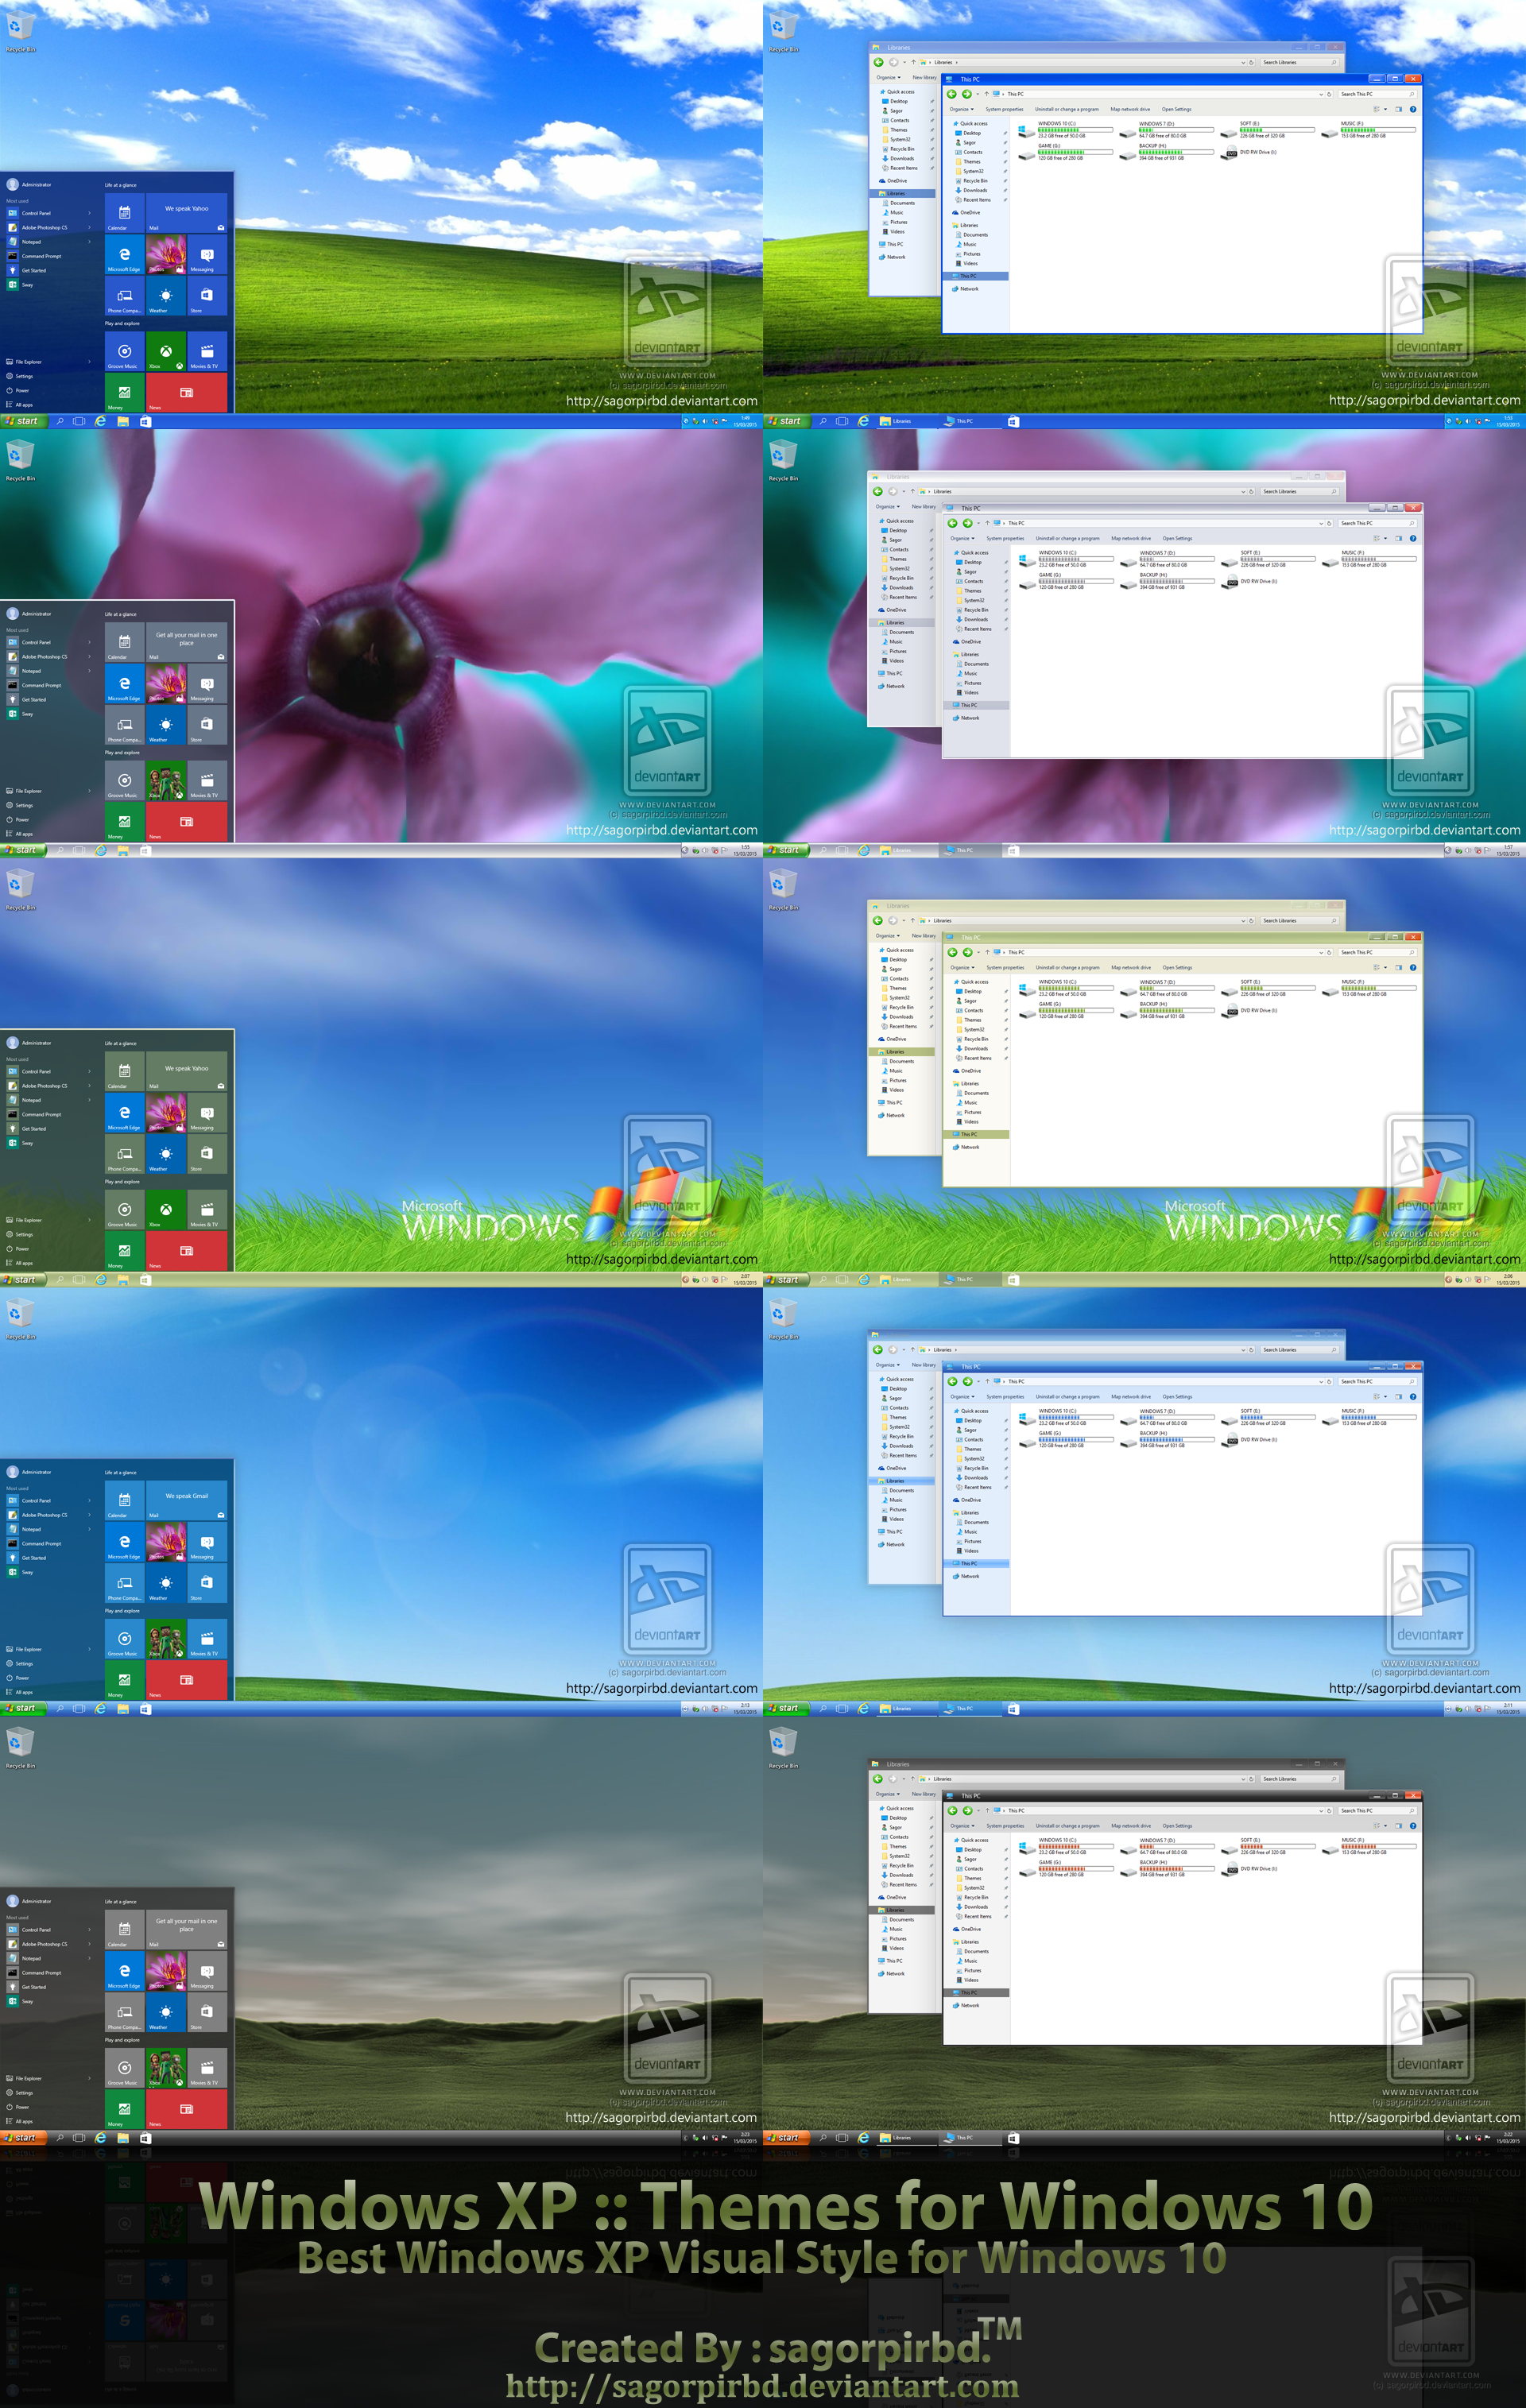 XP Themes Final for Win10 by sagorpirbd on DeviantArt